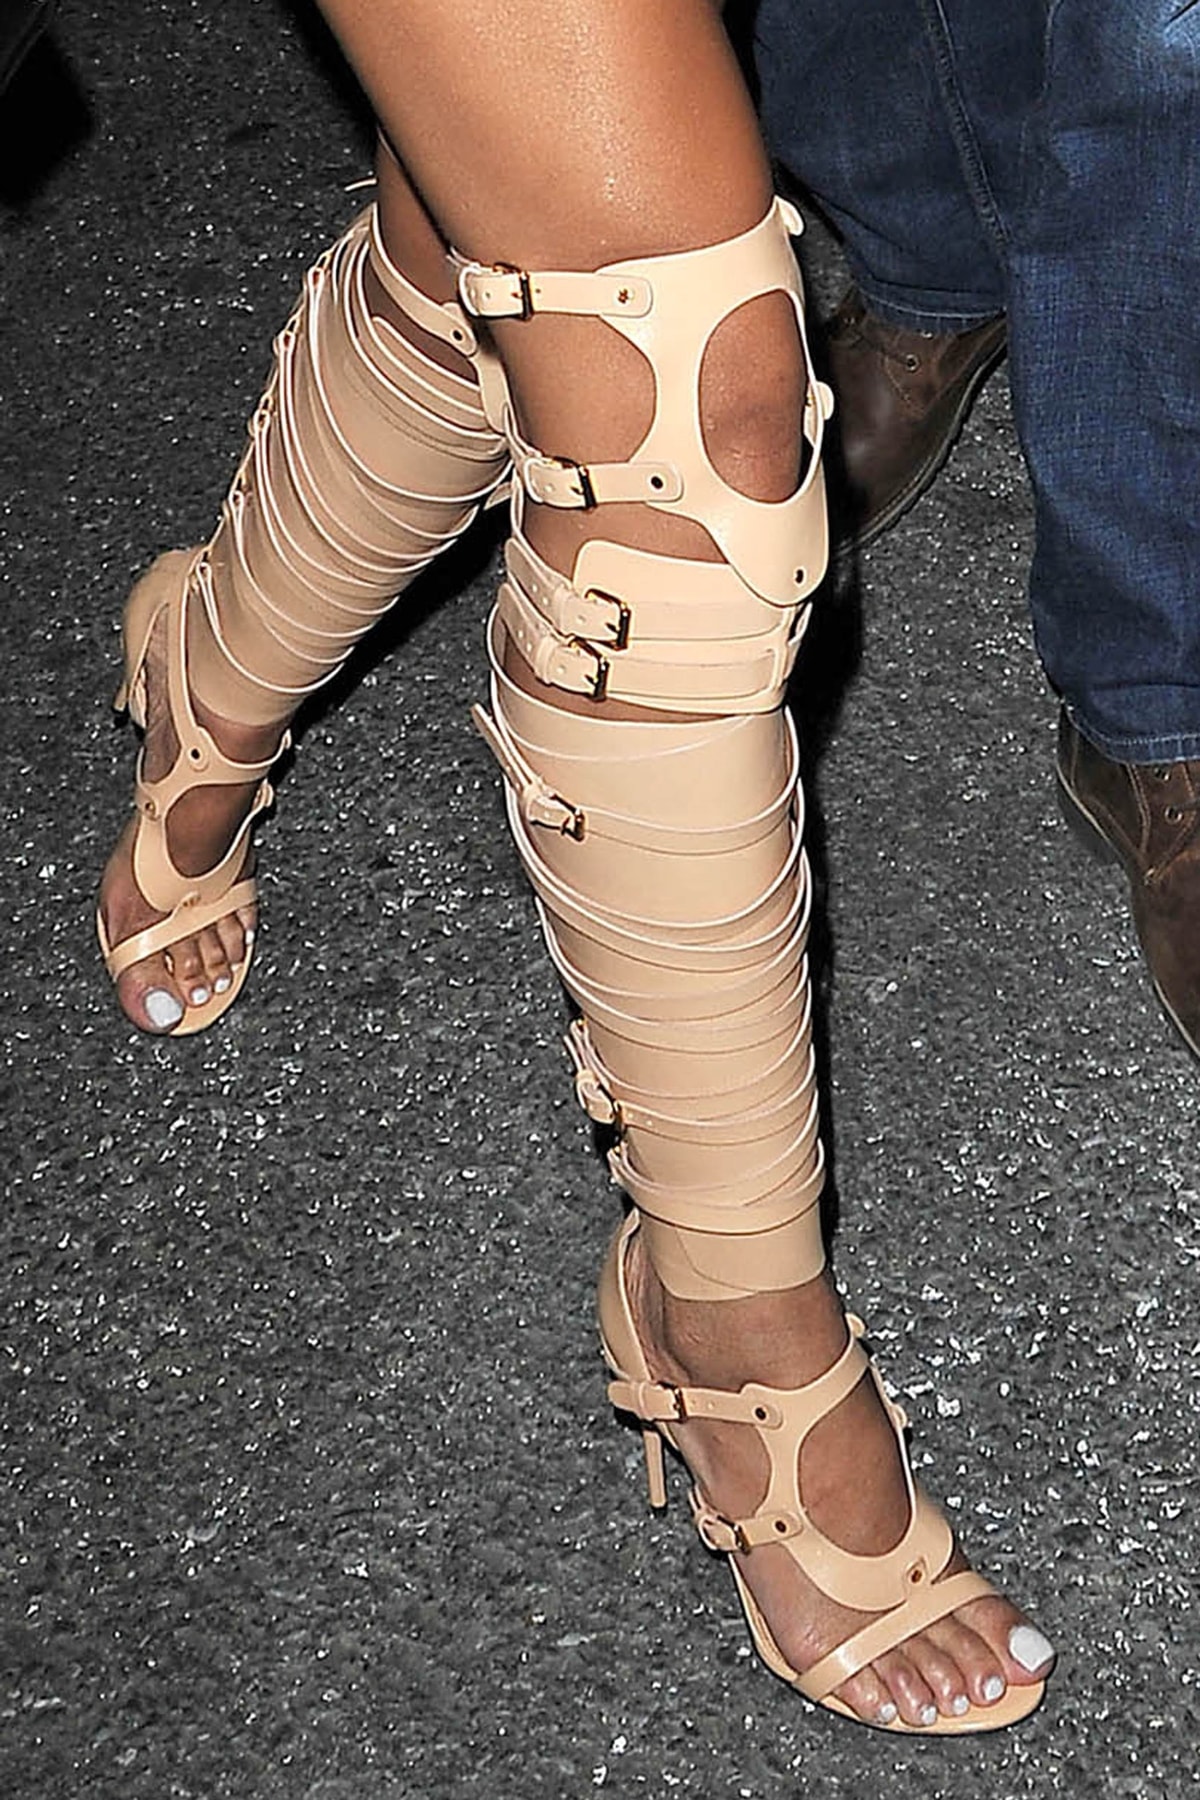 Rihanna's bold, thigh-high, bondage-inspired boots not only made a statement but also accentuated the pop star's enviable legs